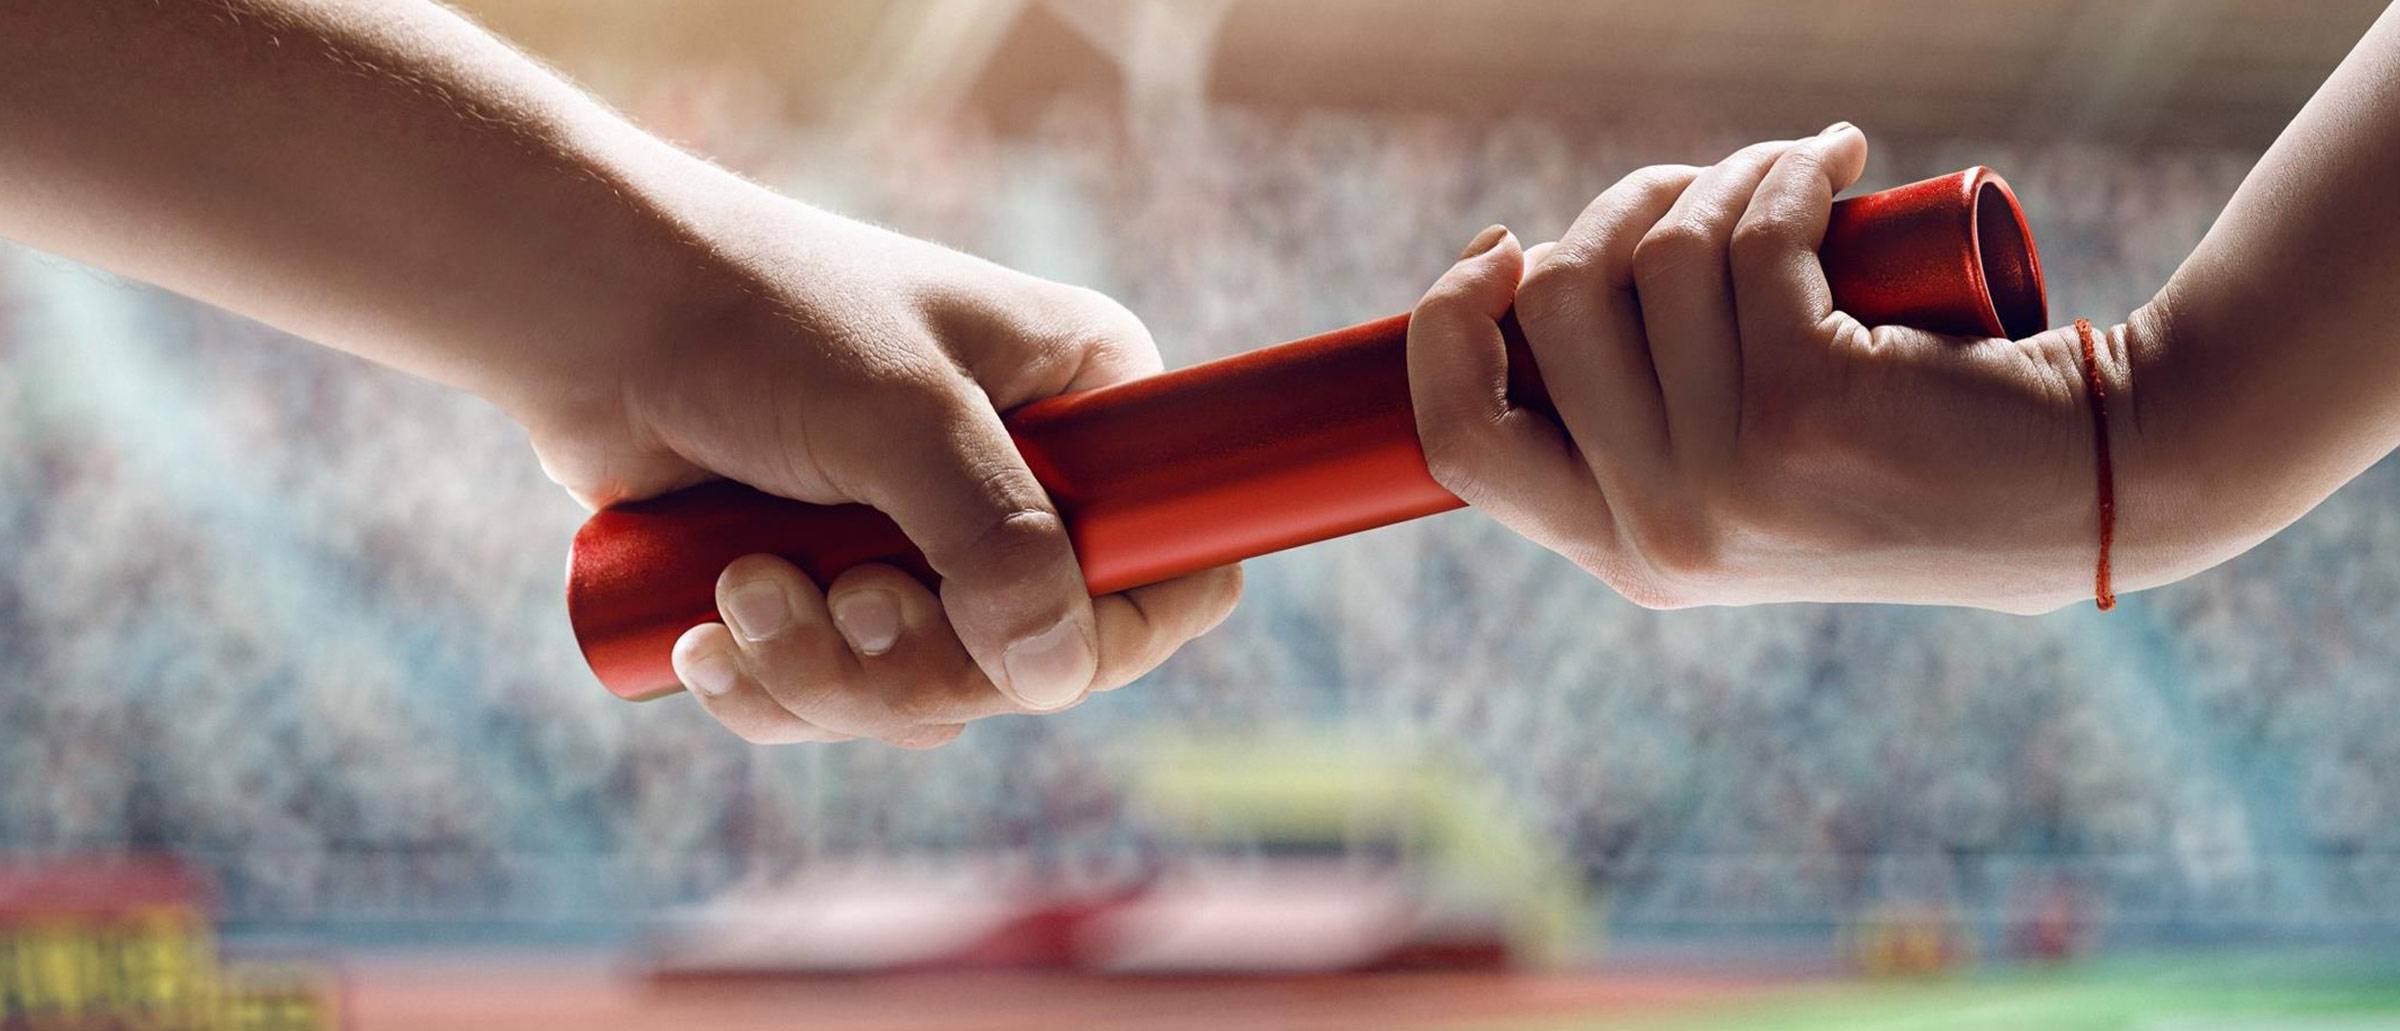 Two hands exchanging a red baton in a blurred stadium